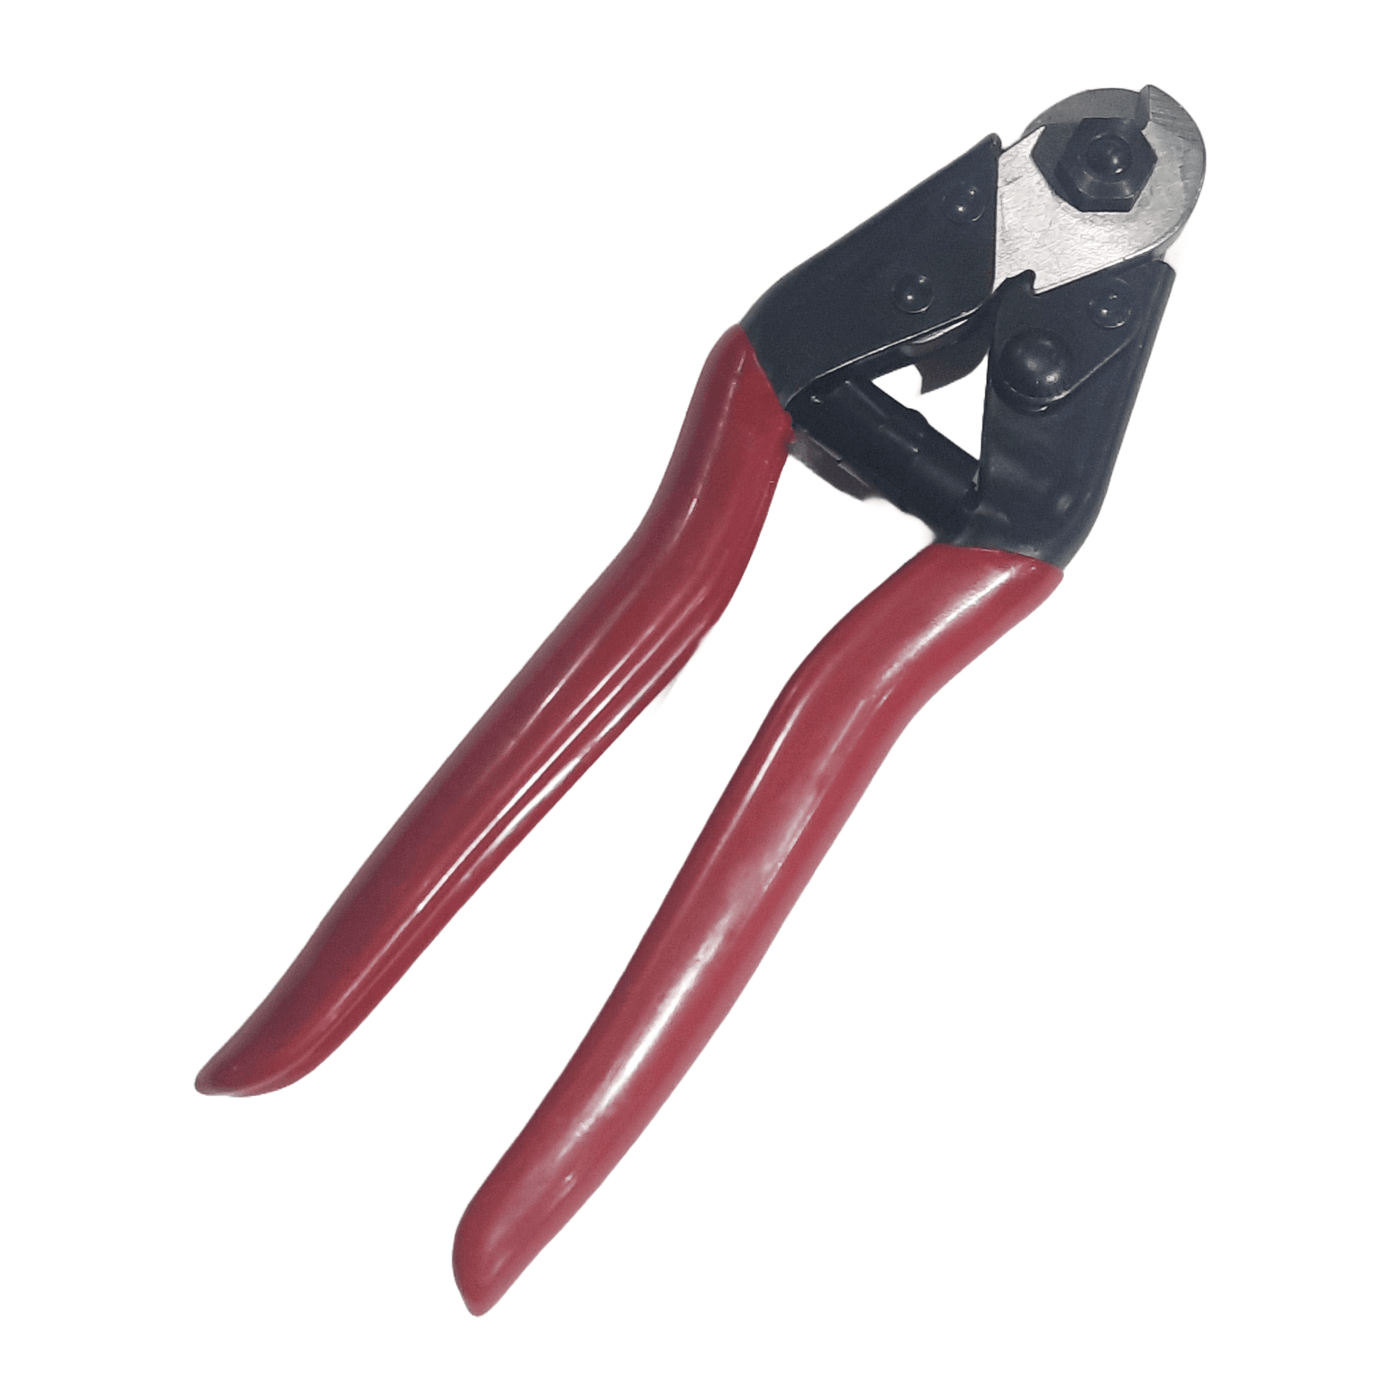 Cable Cutter - Irontrail Trapline Supply LLC